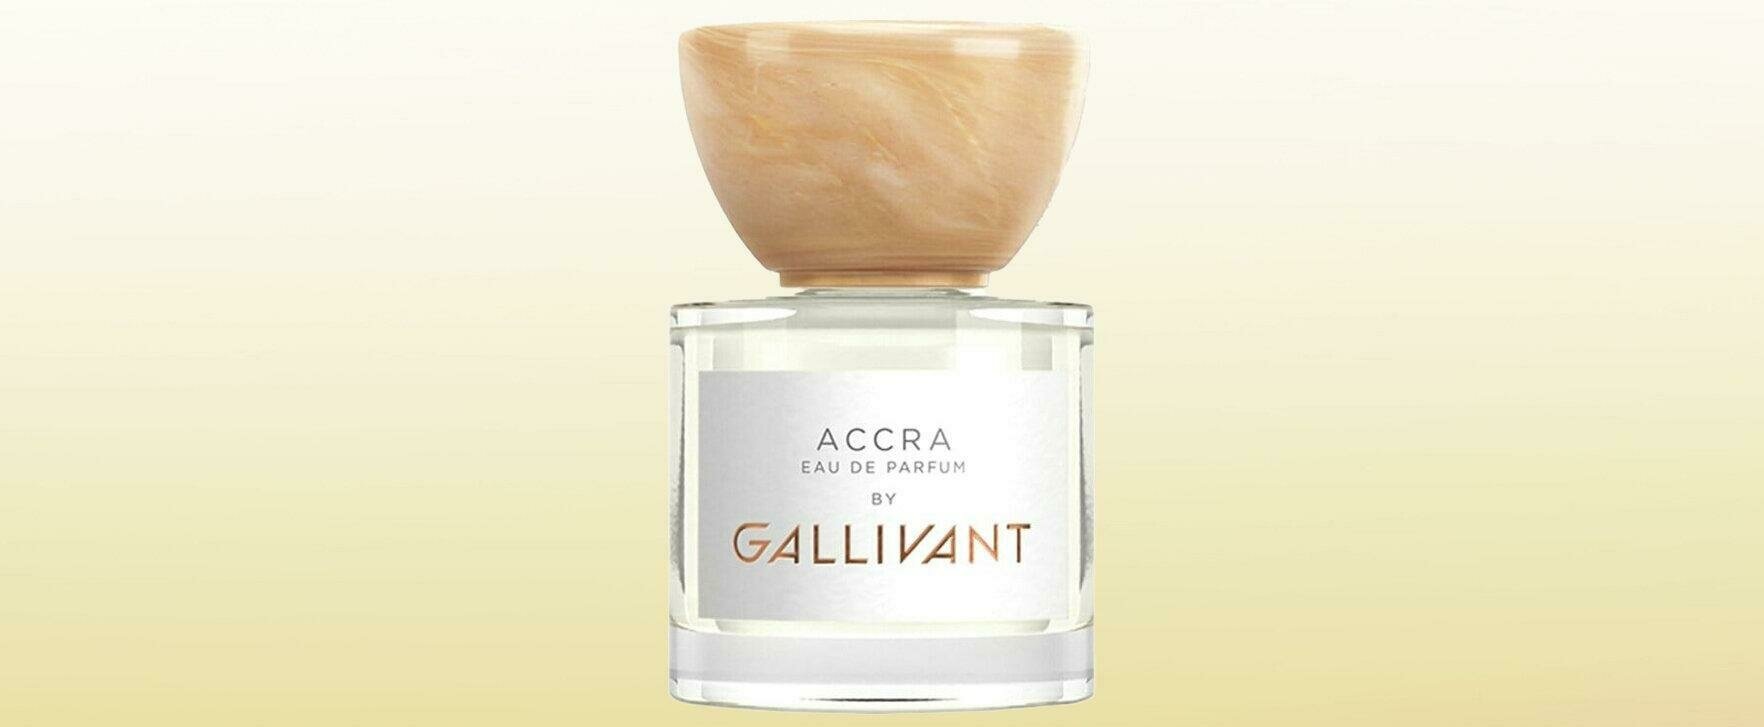 A fragrance journey to West Africa: Gallivant presents "Accra"